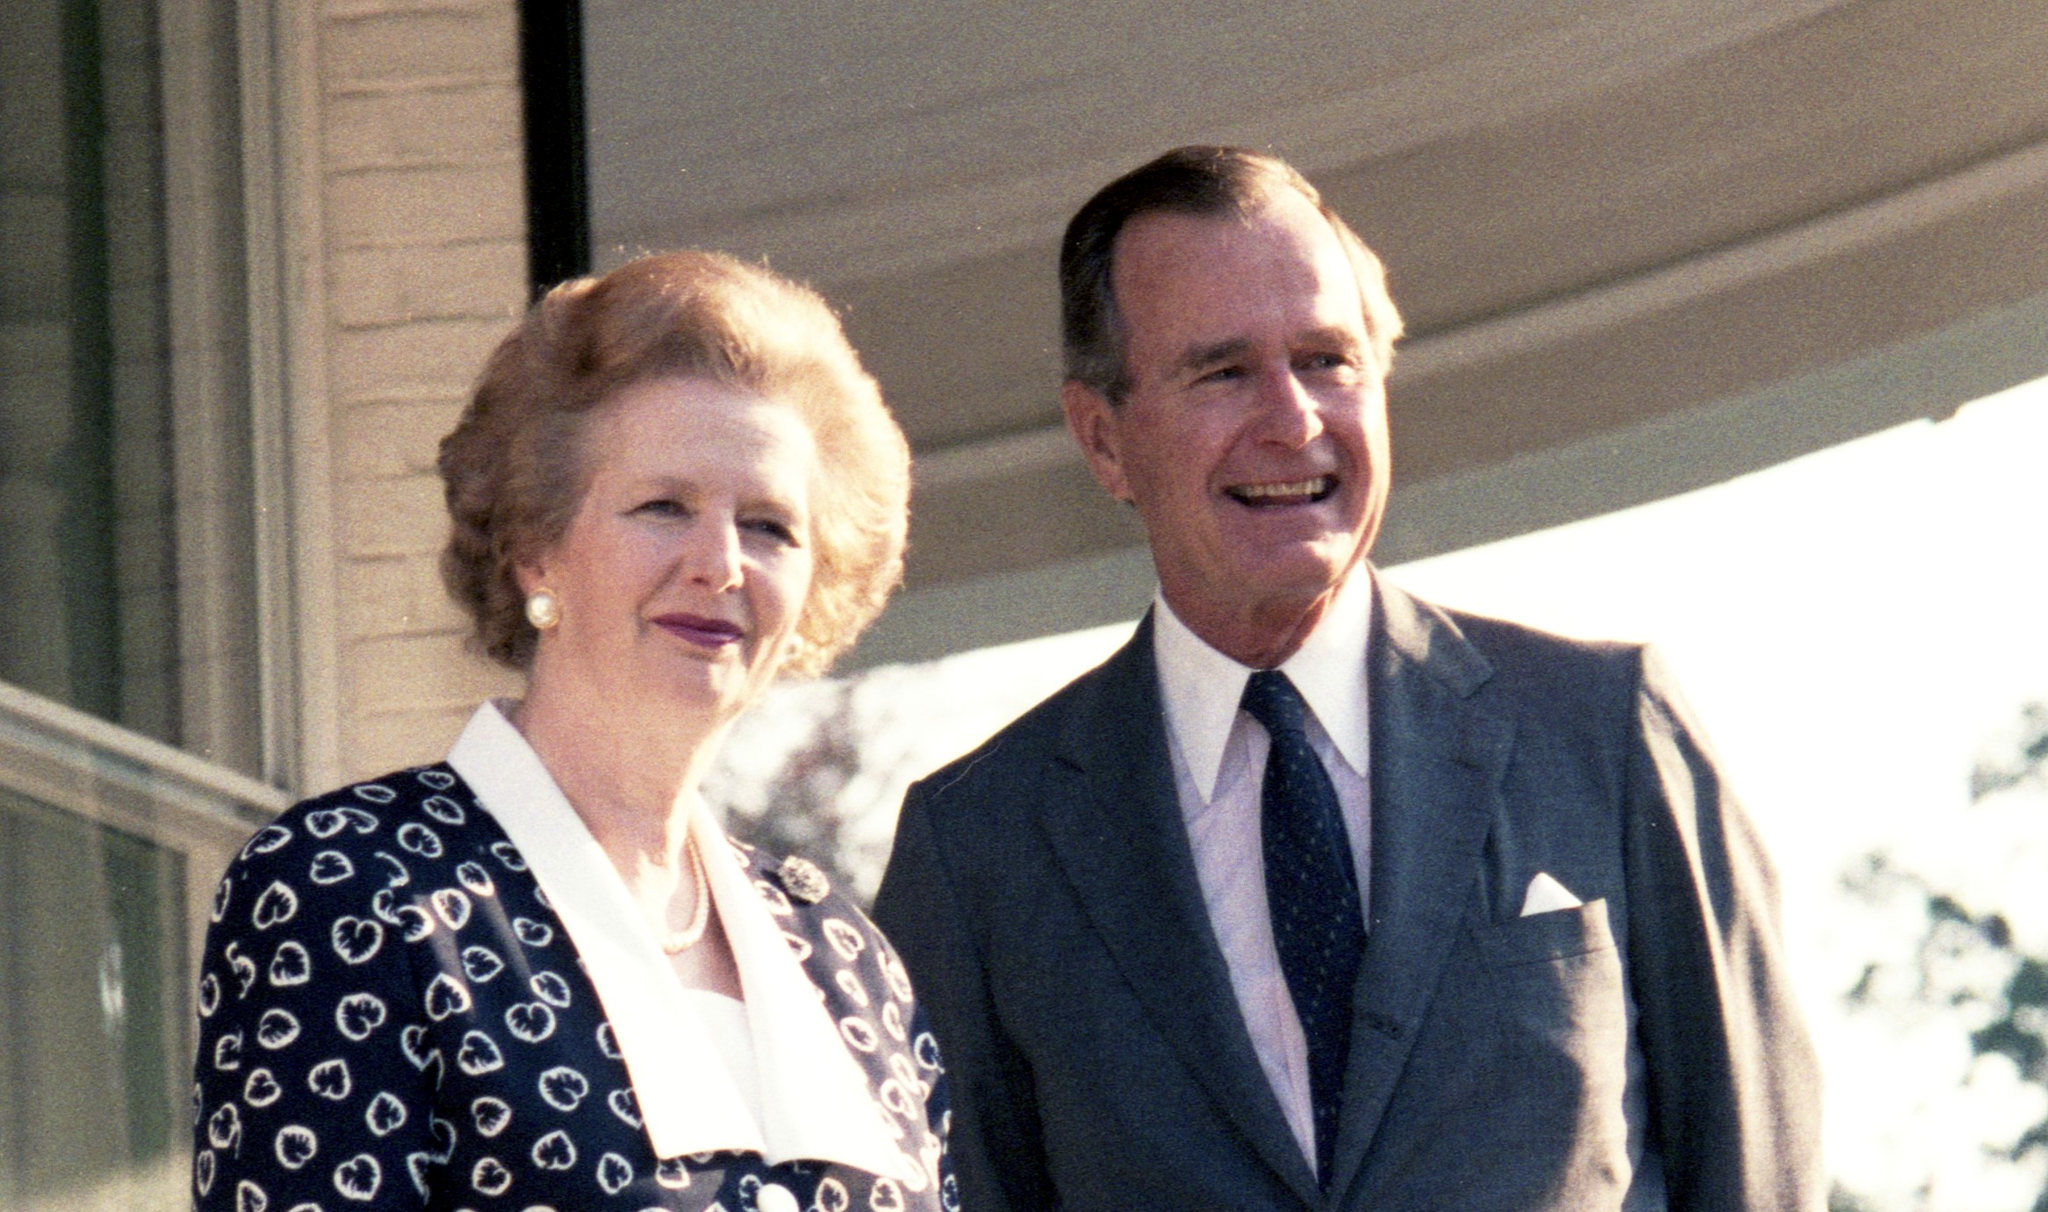 ‘Bang – just like that’: How Thatcher backed Bush in Panama